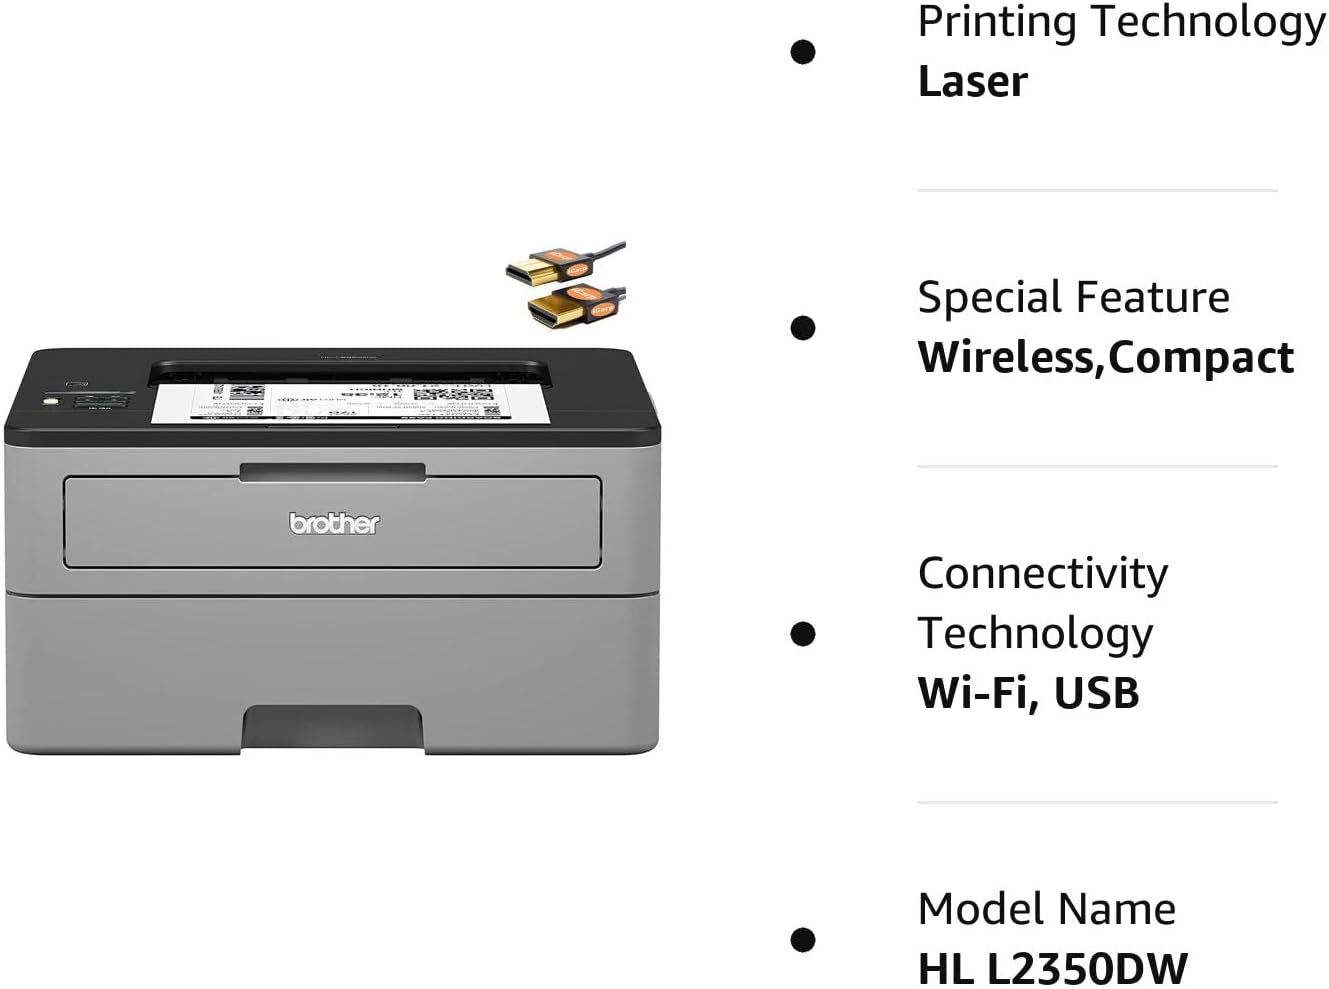 Check of Brother HL-L2350DW Series Compact Wireless Monochrome Laser Printer